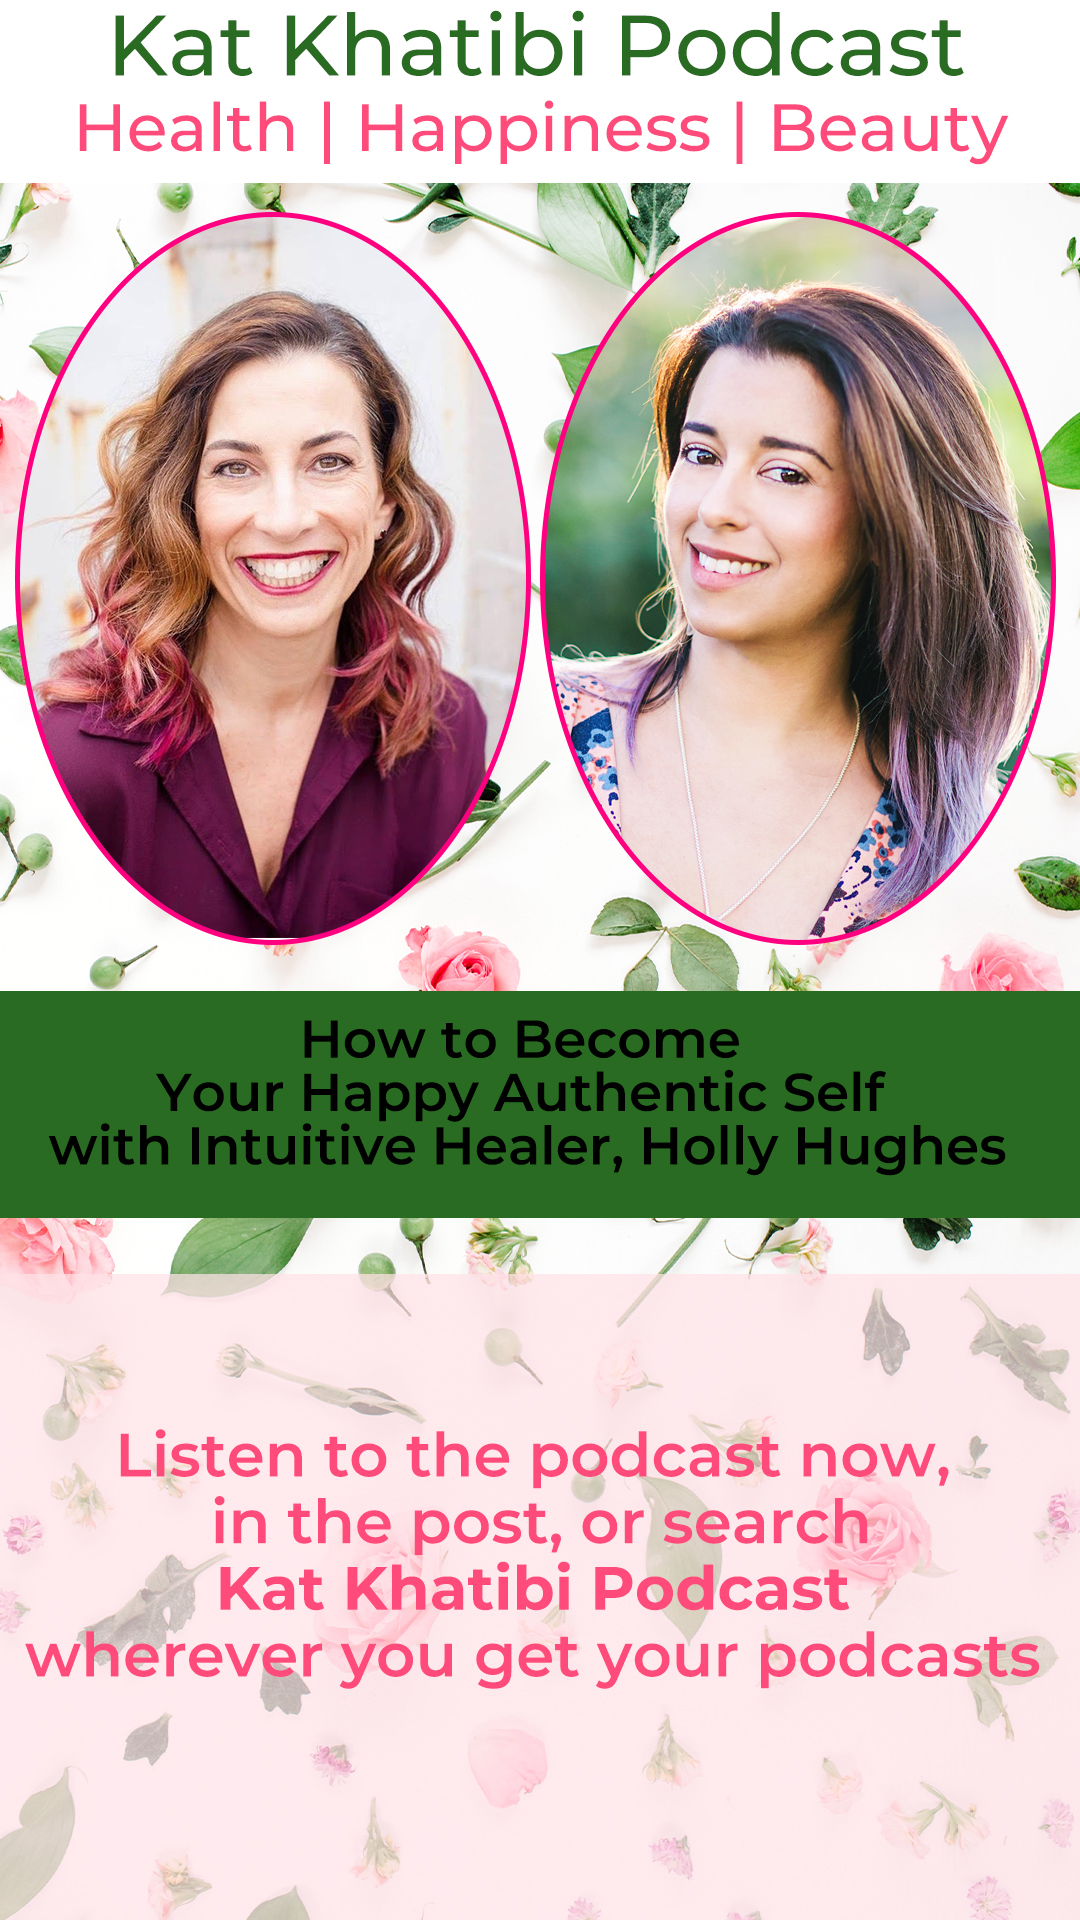 How to Become Your Happy Authentic Self with Intuitive Healer, Holly Hughes